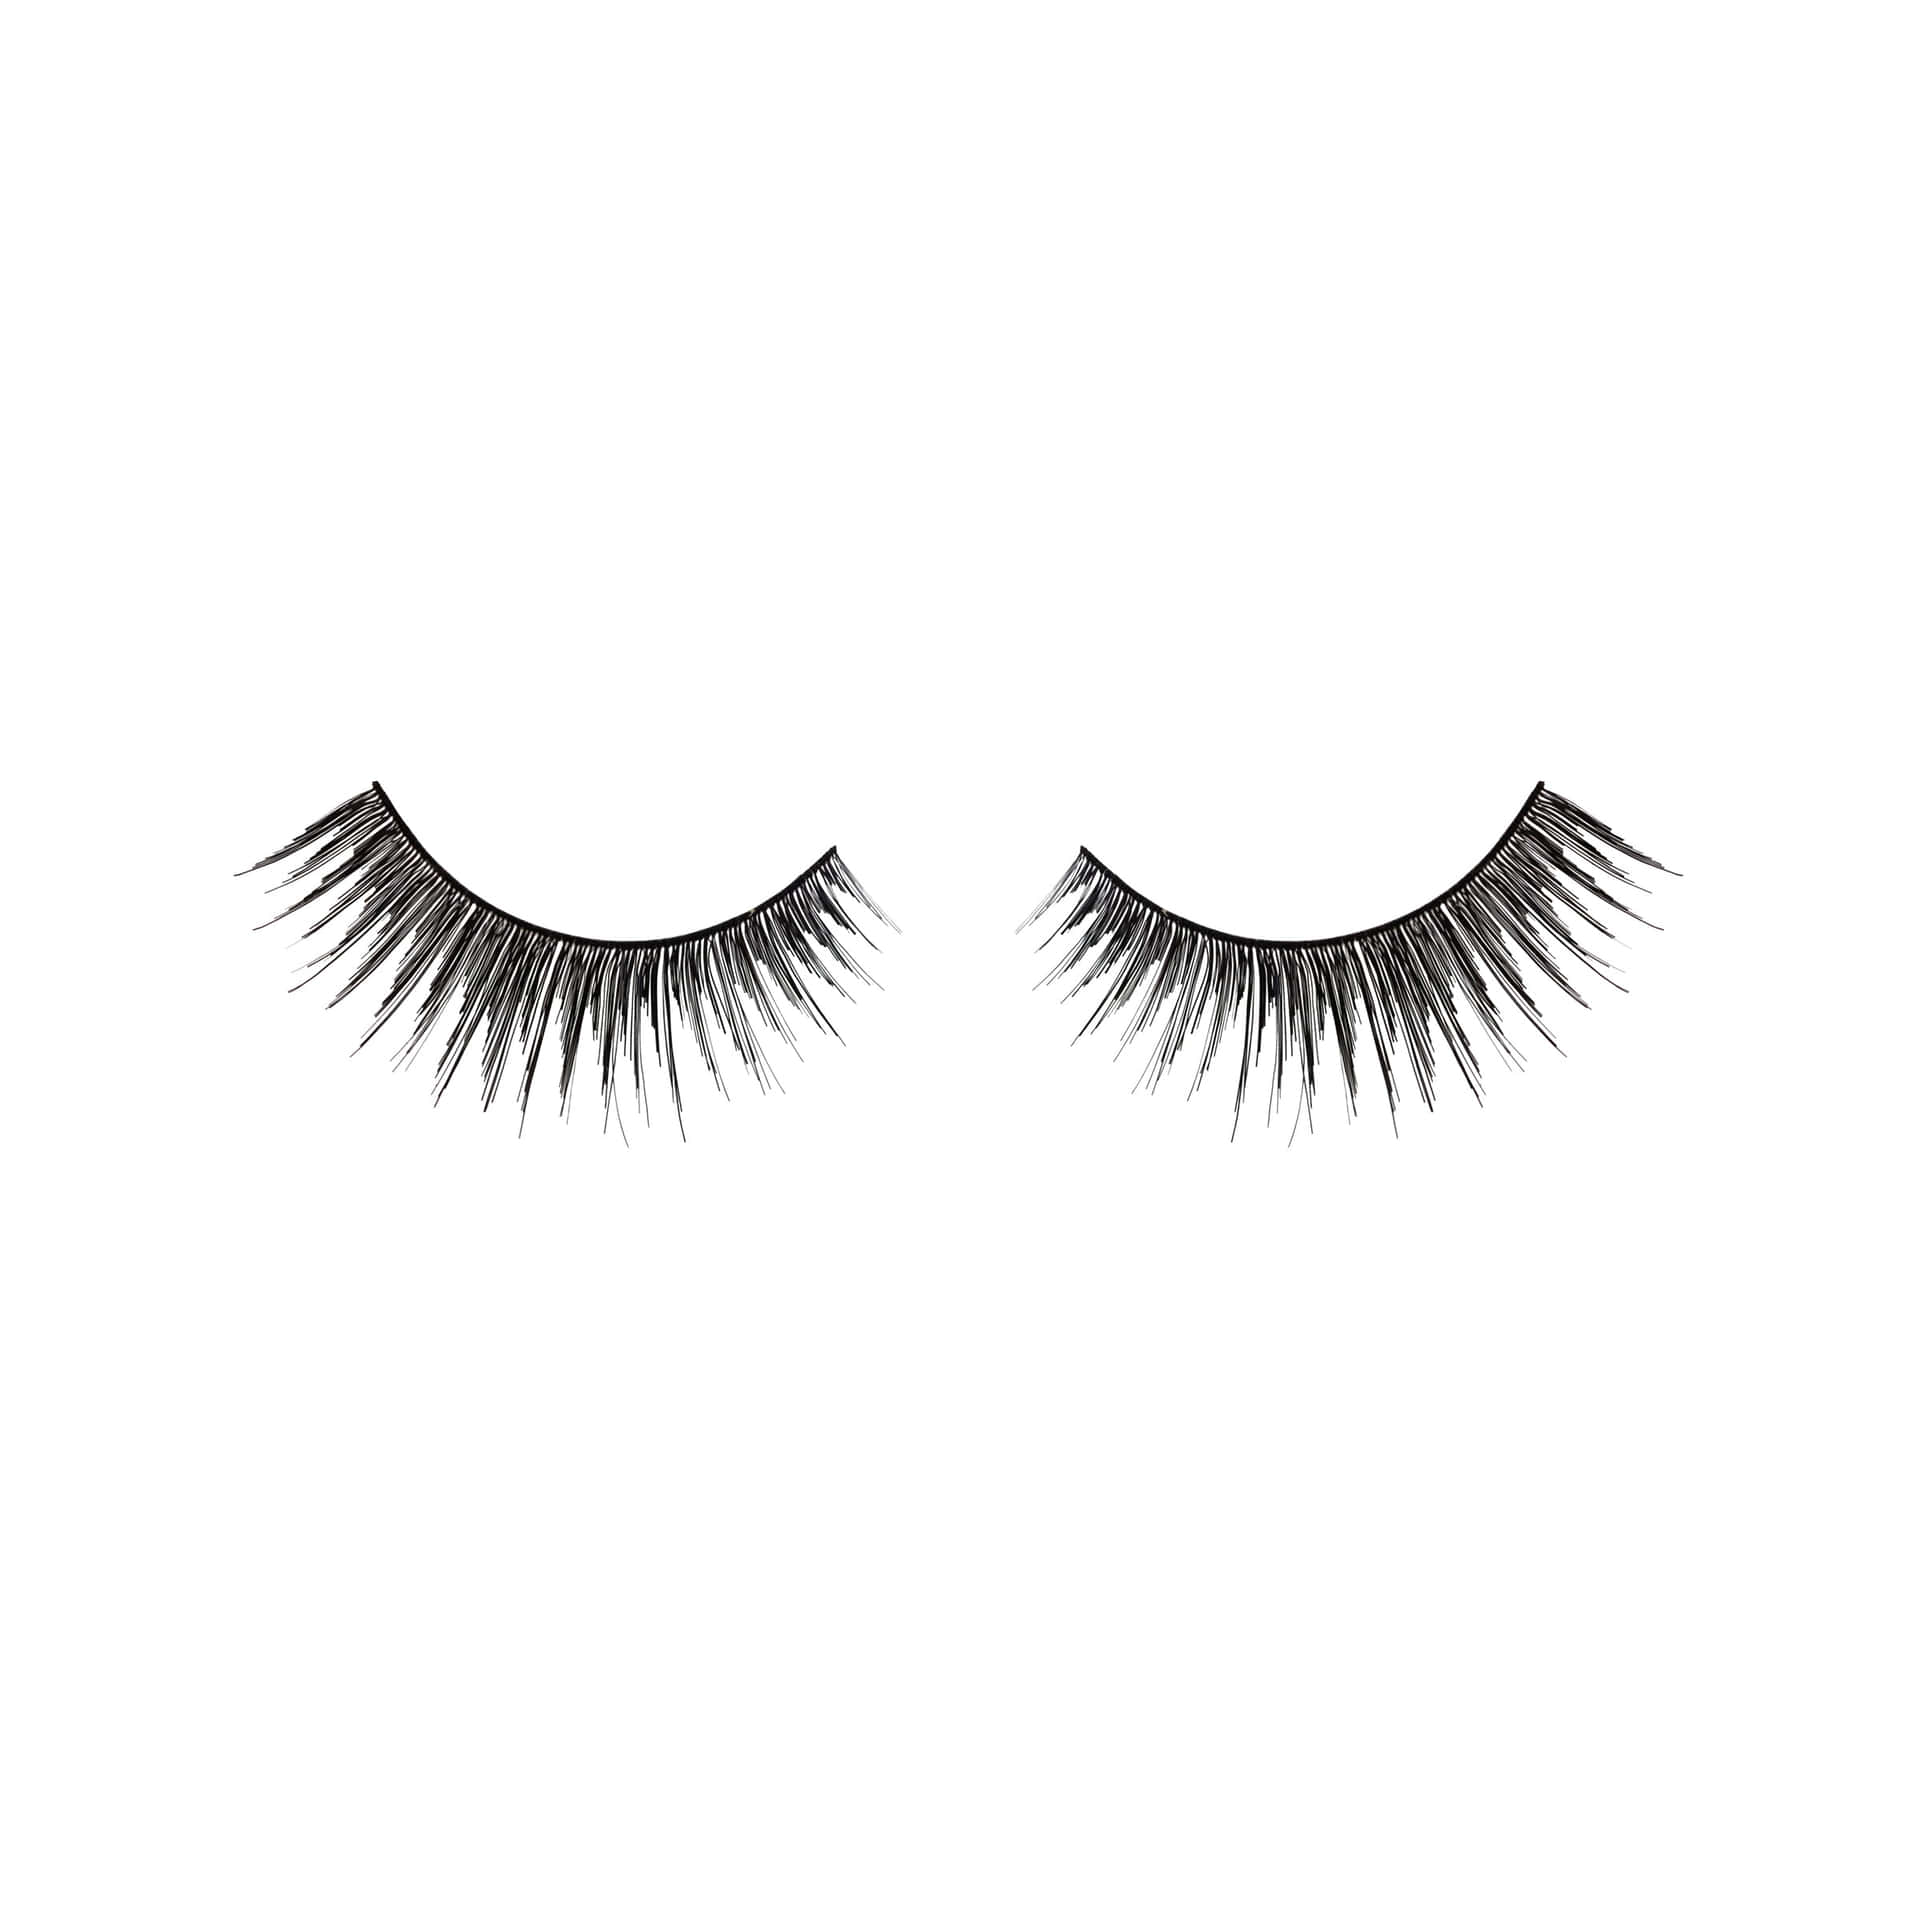 A Pair Of False Lashes On A White Background